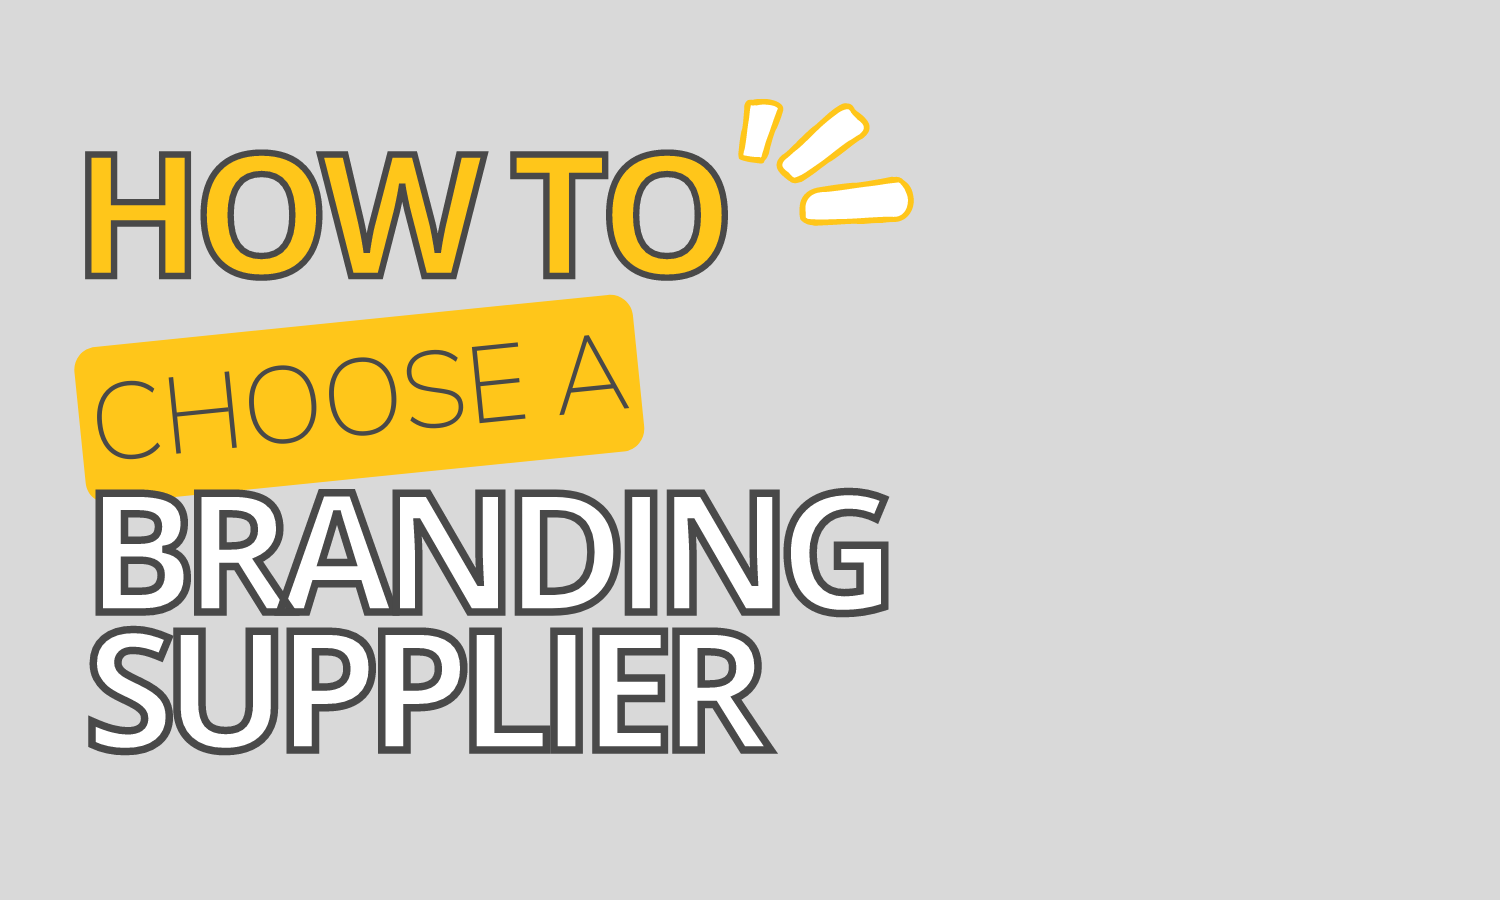 graphic that says "How to Choose a Branding Supplier"